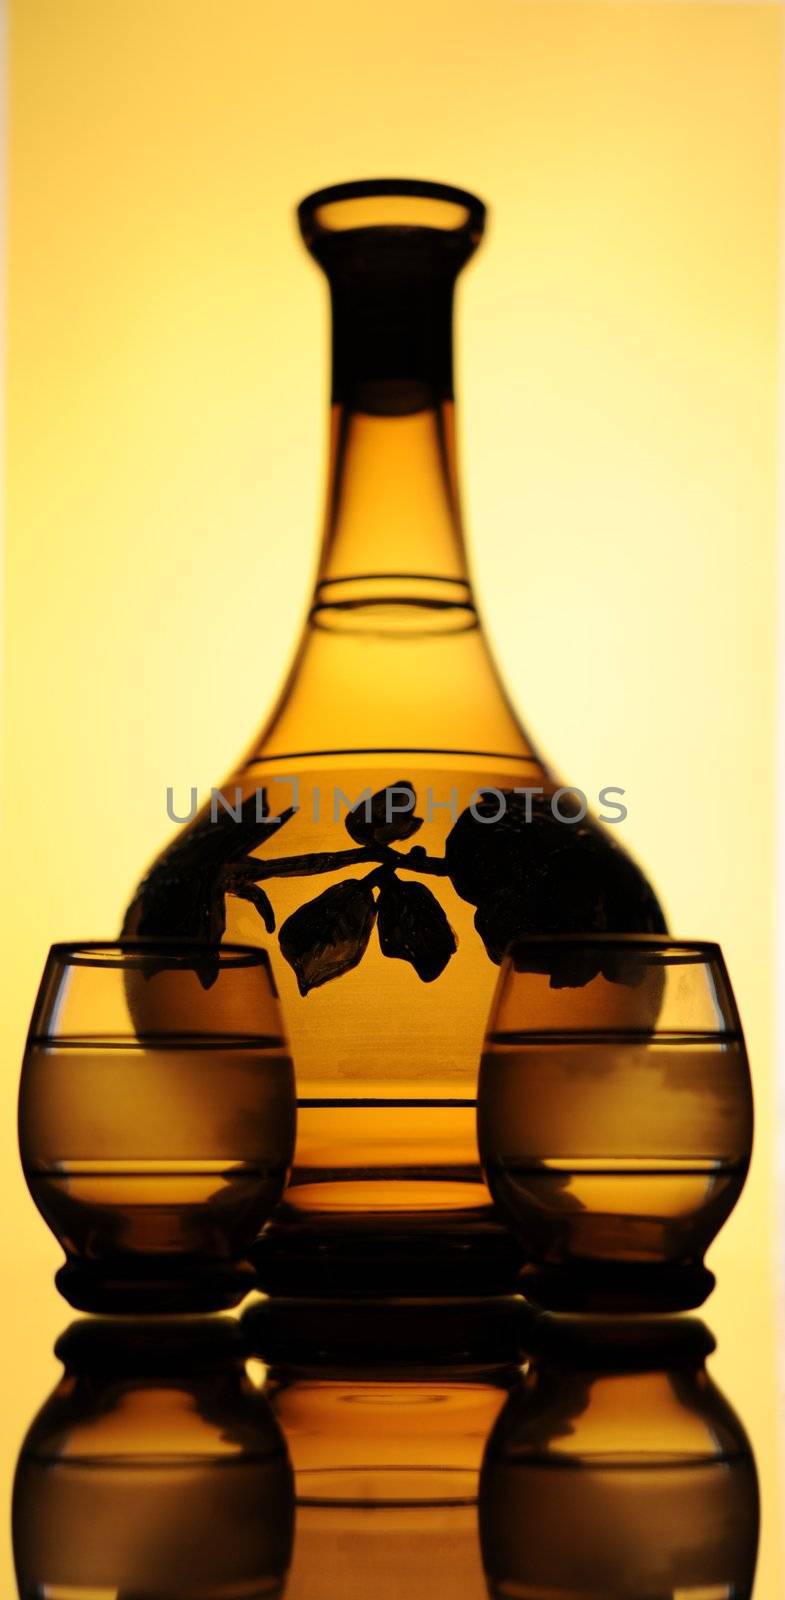 Elegant Crystal Decanter And Wine Glasses Over Yellow  Background.